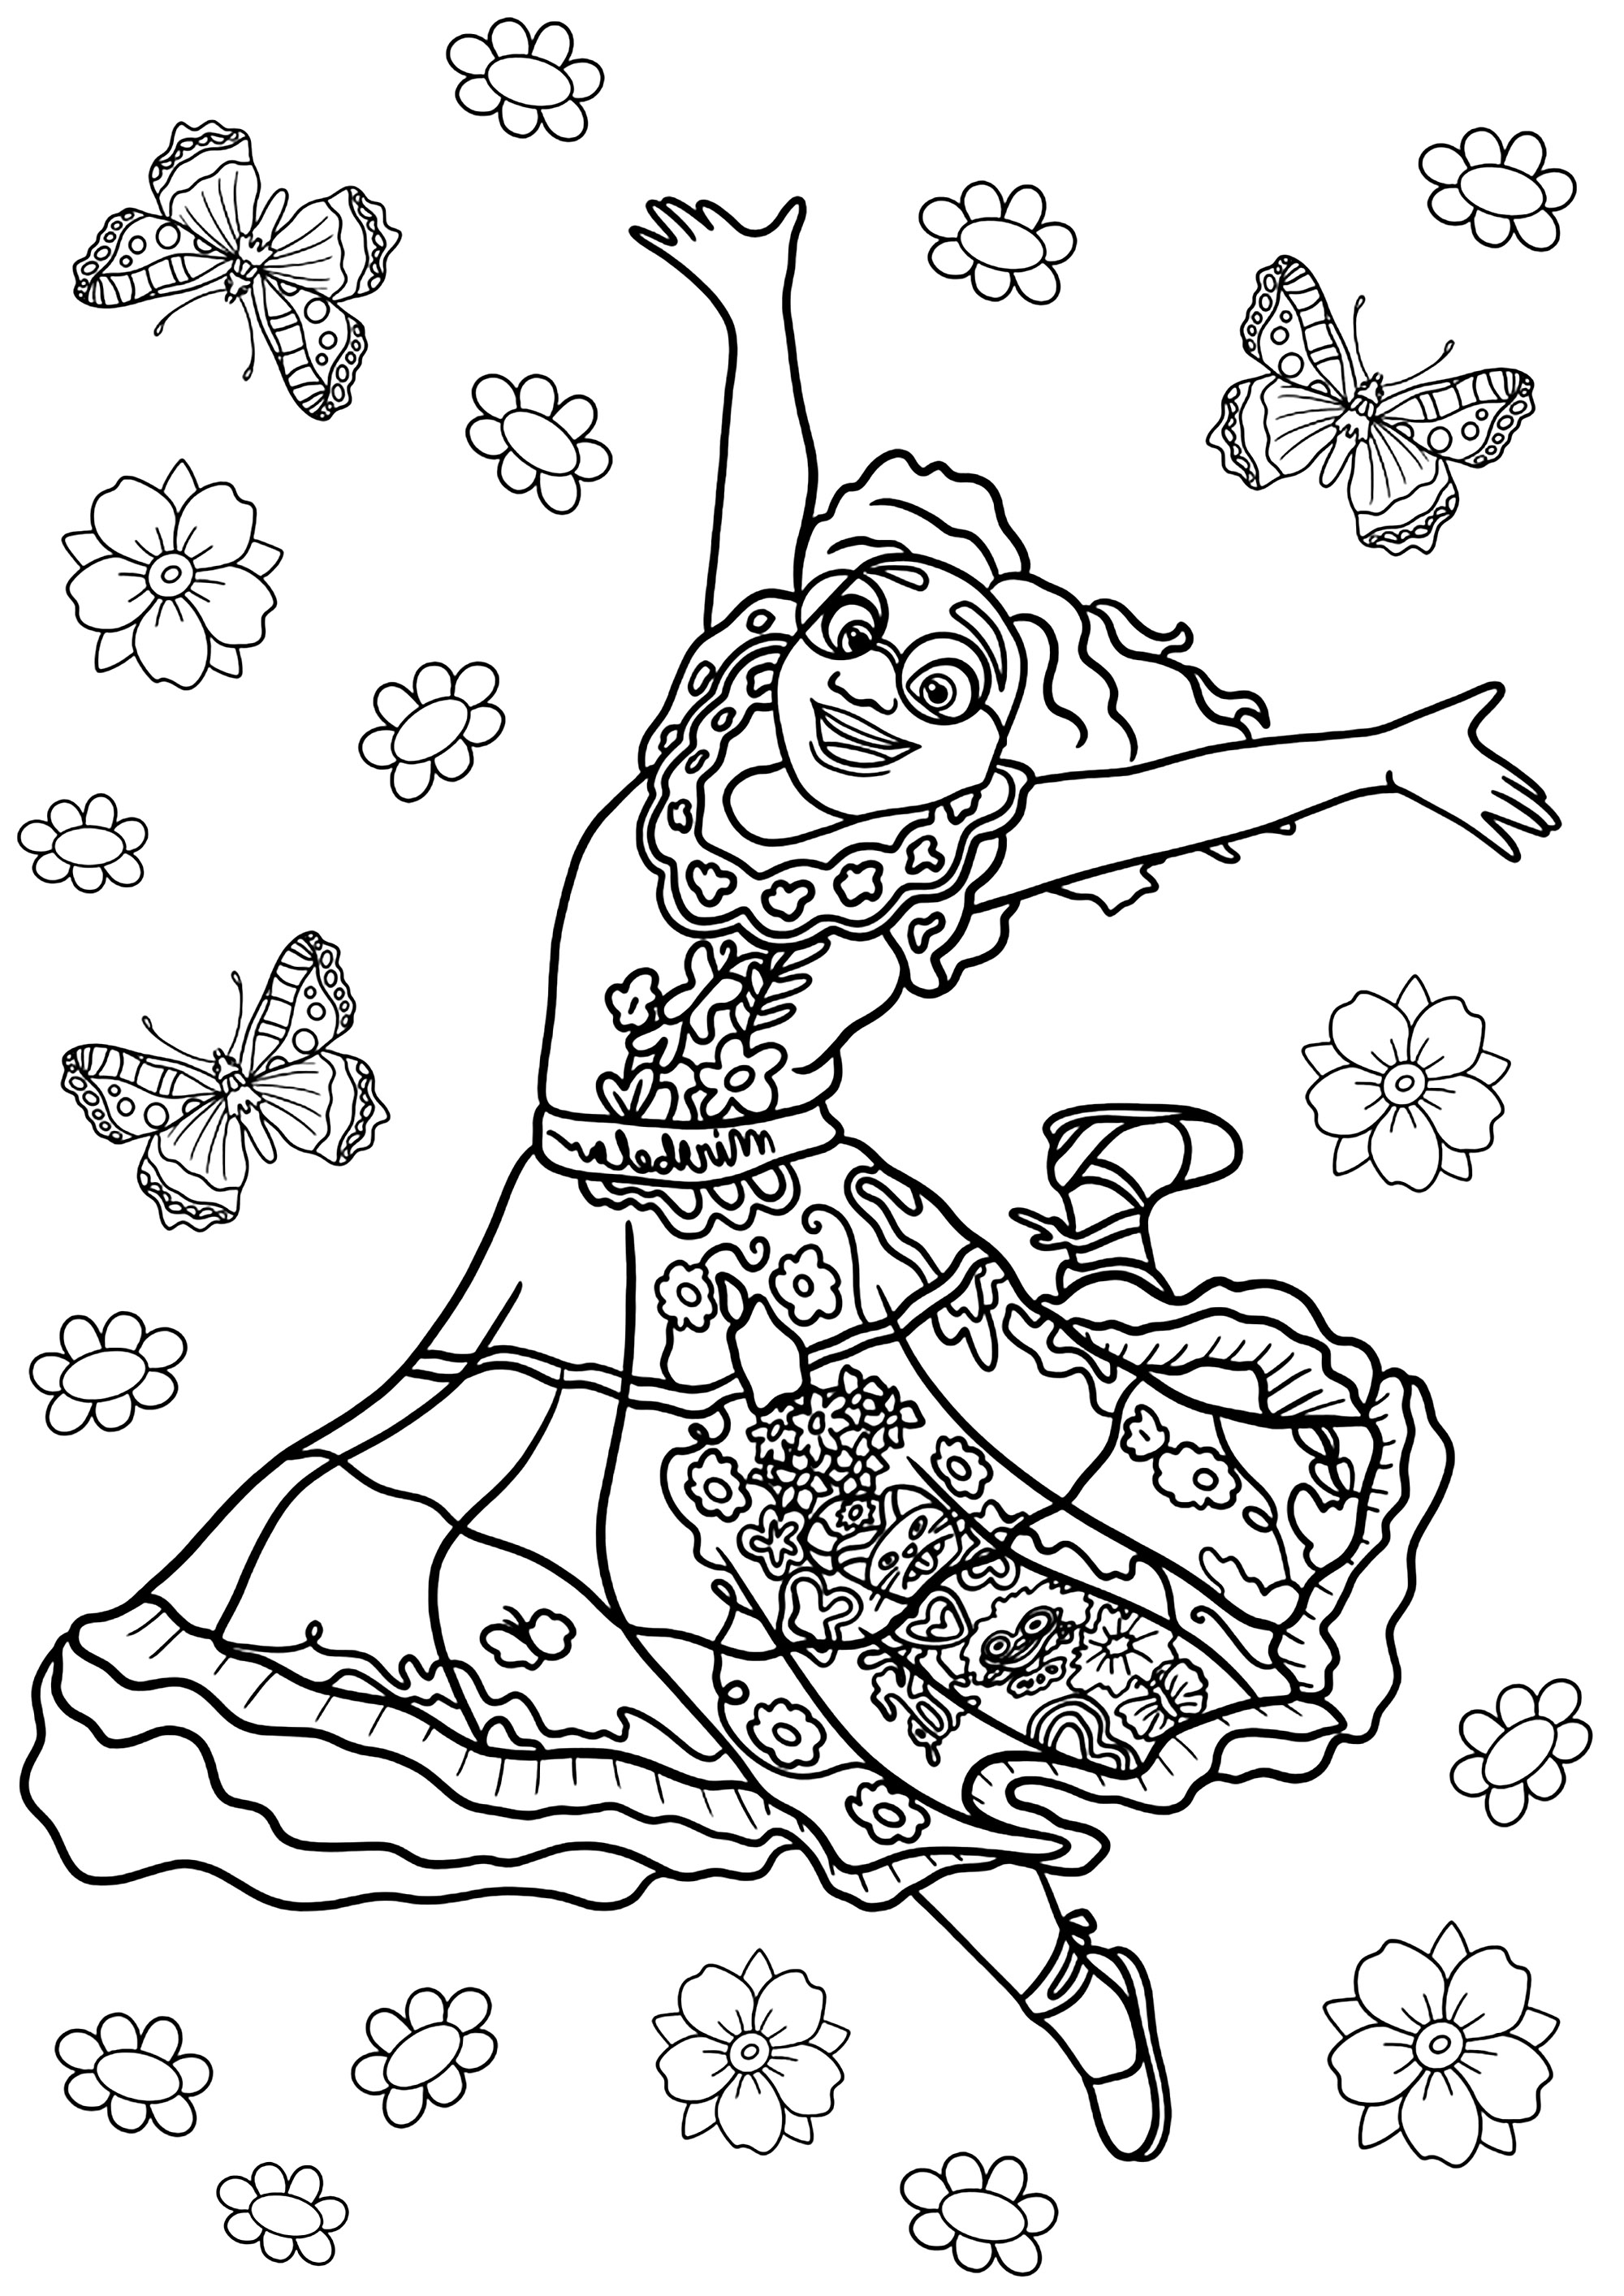 Encanto coloring page: Mirabel jumping among flowers and butterflies -  Encanto Kids Coloring Pages